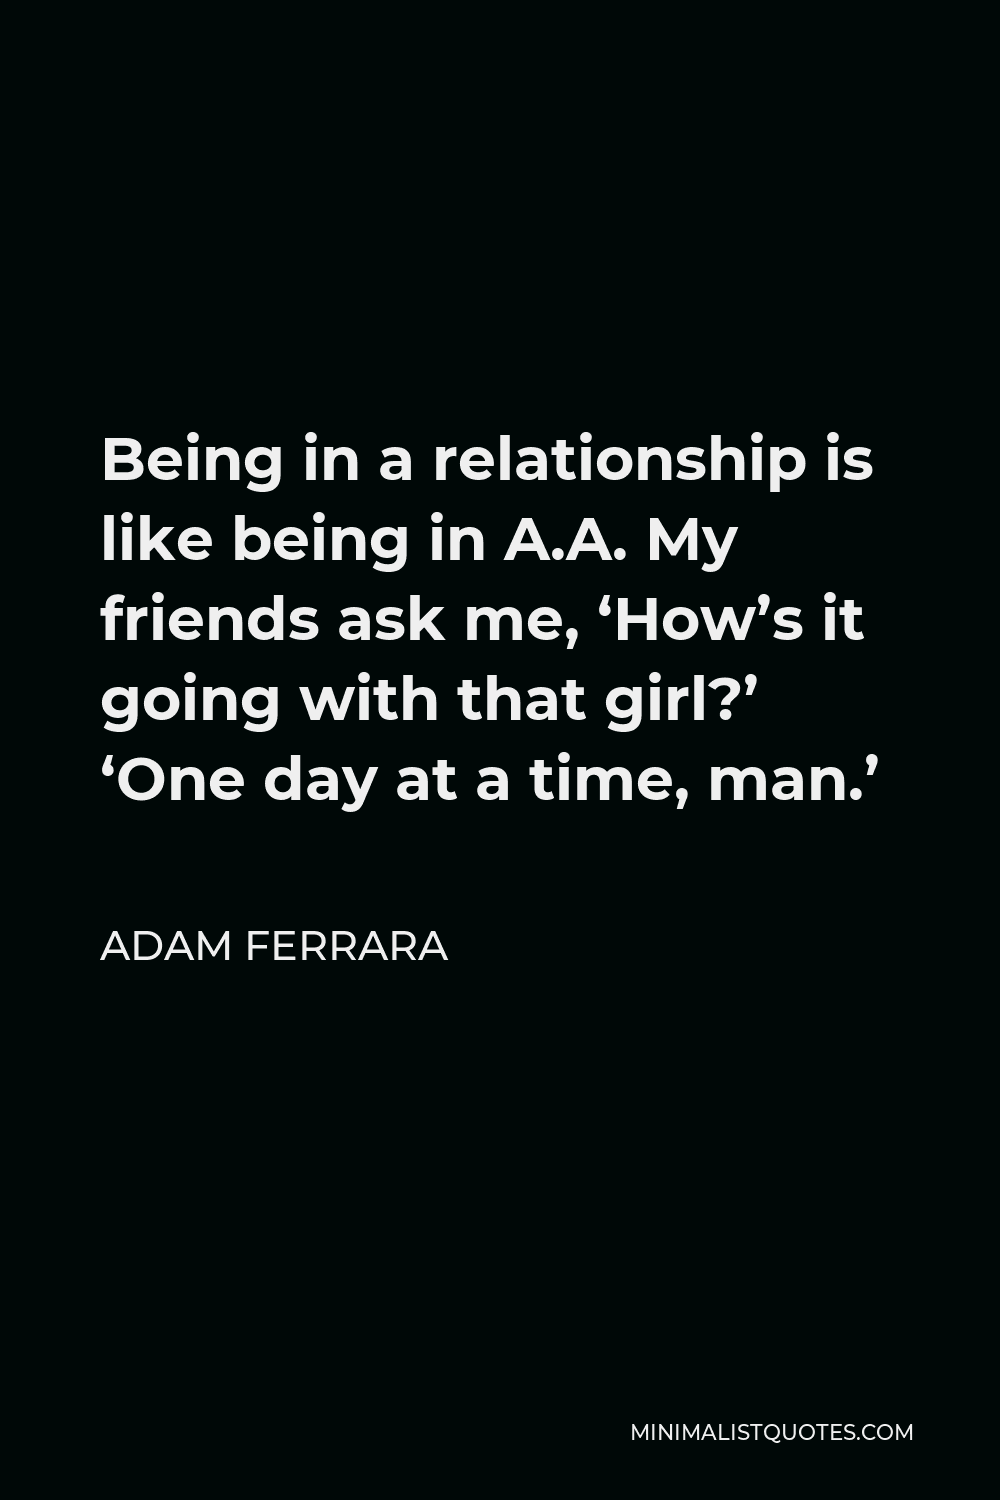 Adam Ferrara Quote - Being in a relationship is like being in A.A. My friends ask me, ‘How’s it going with that girl?’ ‘One day at a time, man.’